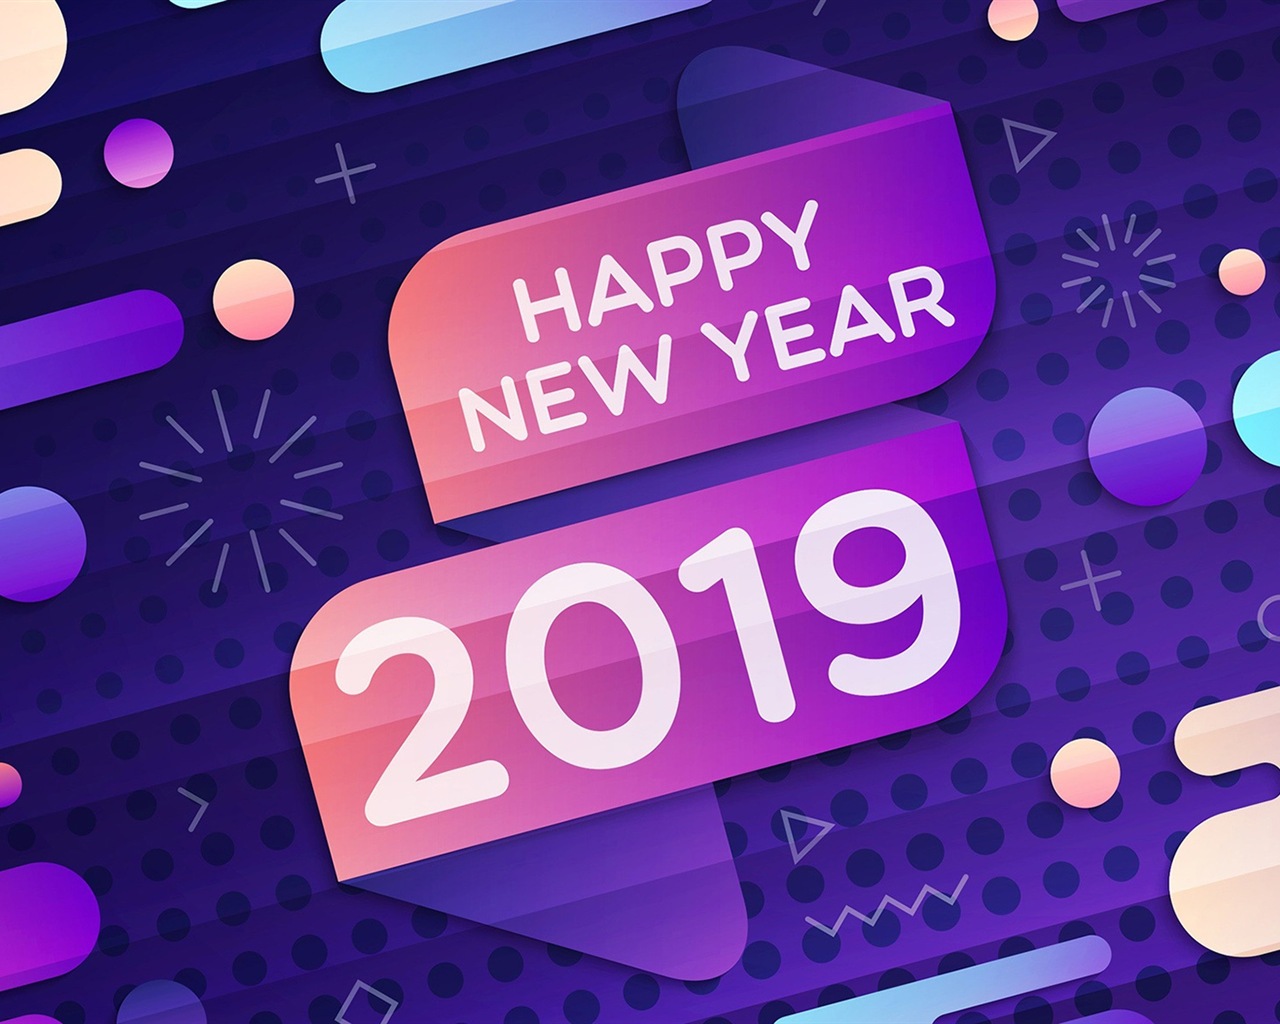 Happy New Year 2019 HD wallpapers #10 - 1280x1024